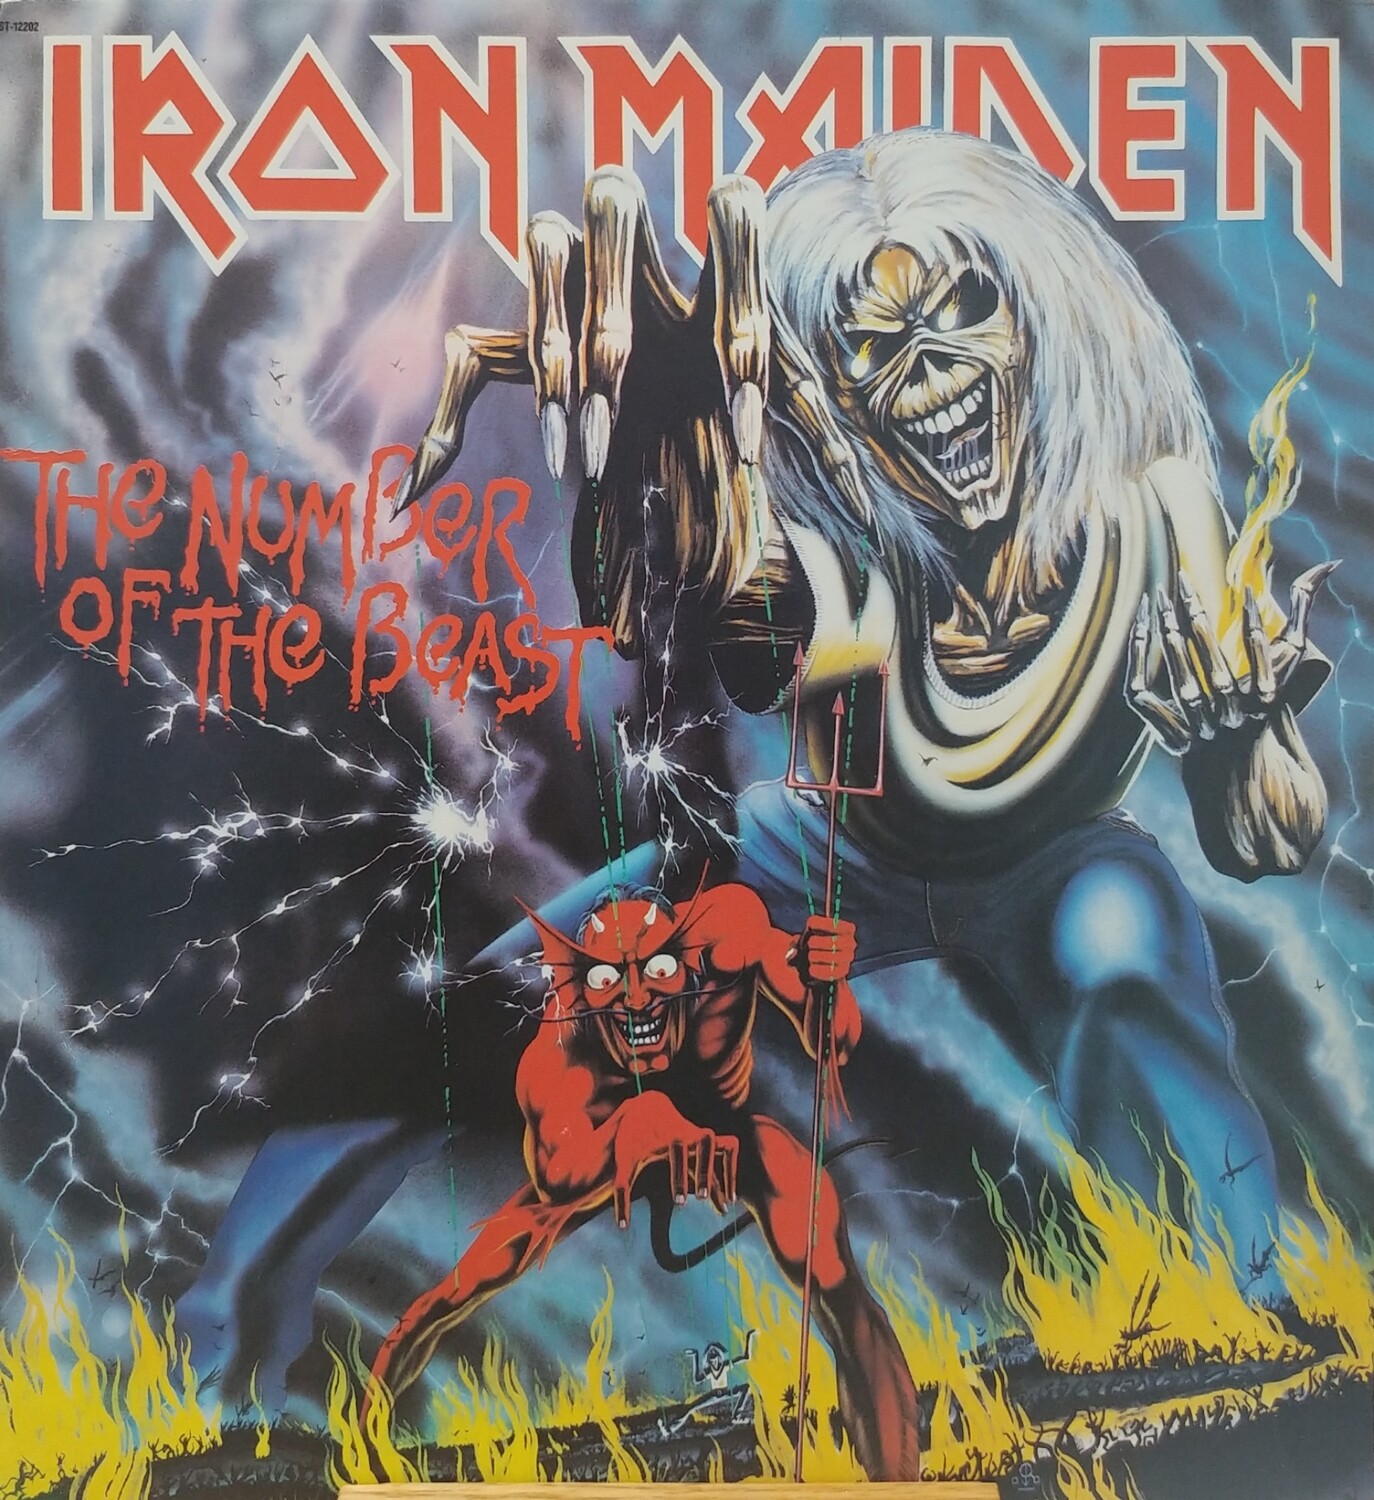 Iron Maiden - The number of the beast